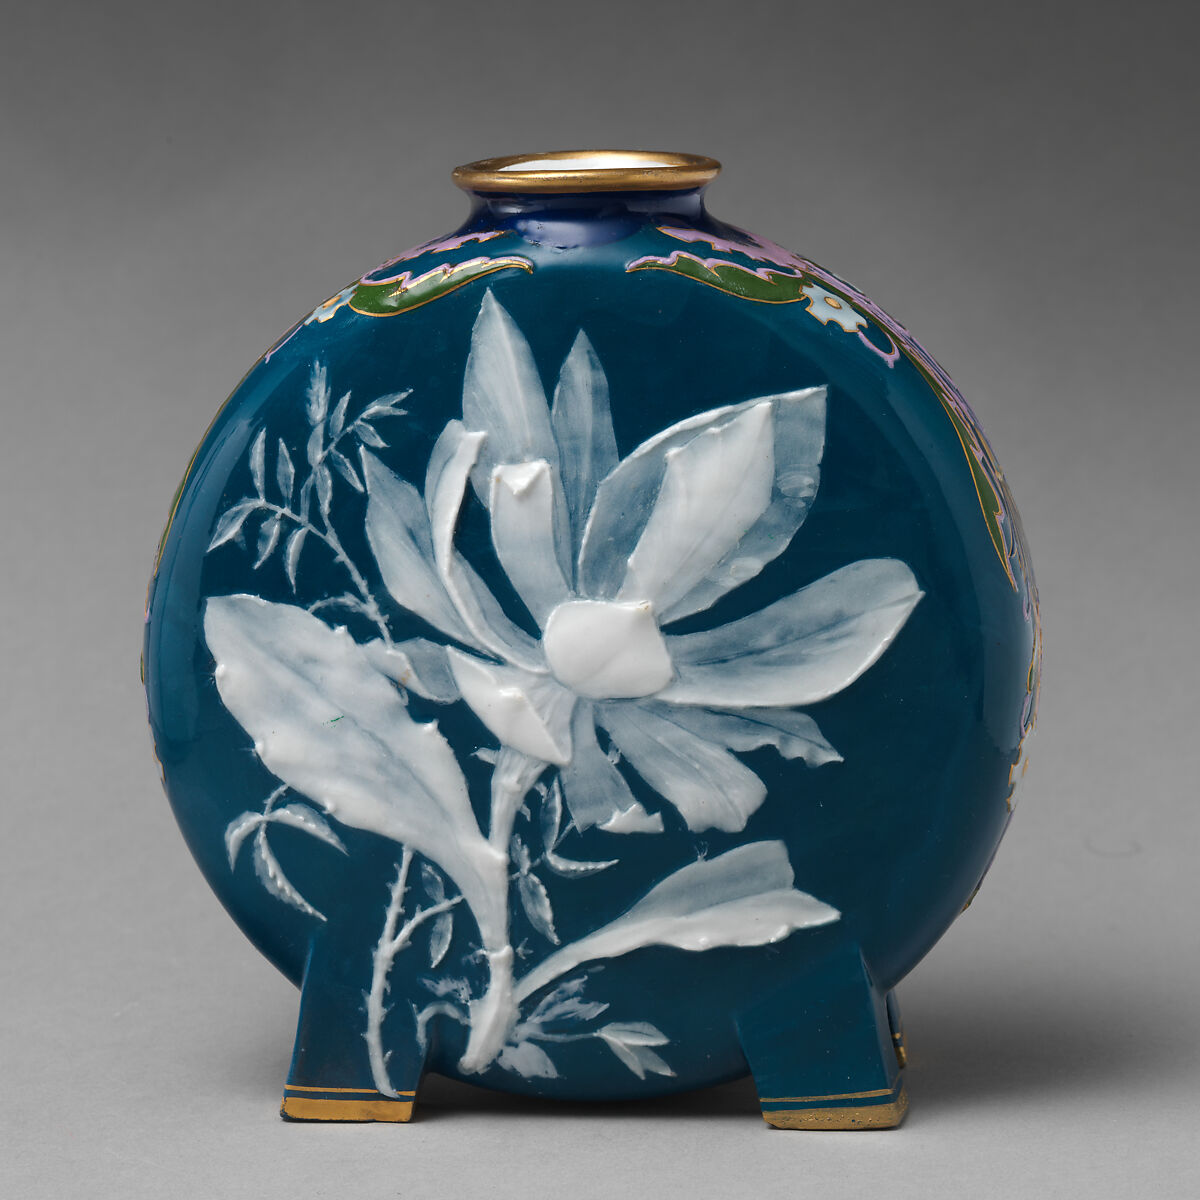 Moon flask with lily or floral motif (one of a pair), Minton(s) (British, Stoke-on-Trent, 1793–present), Bone china decorated with pâte-sur-pâte, enamel, and gilding, British, Stoke-on-Trent, Staffordshire 